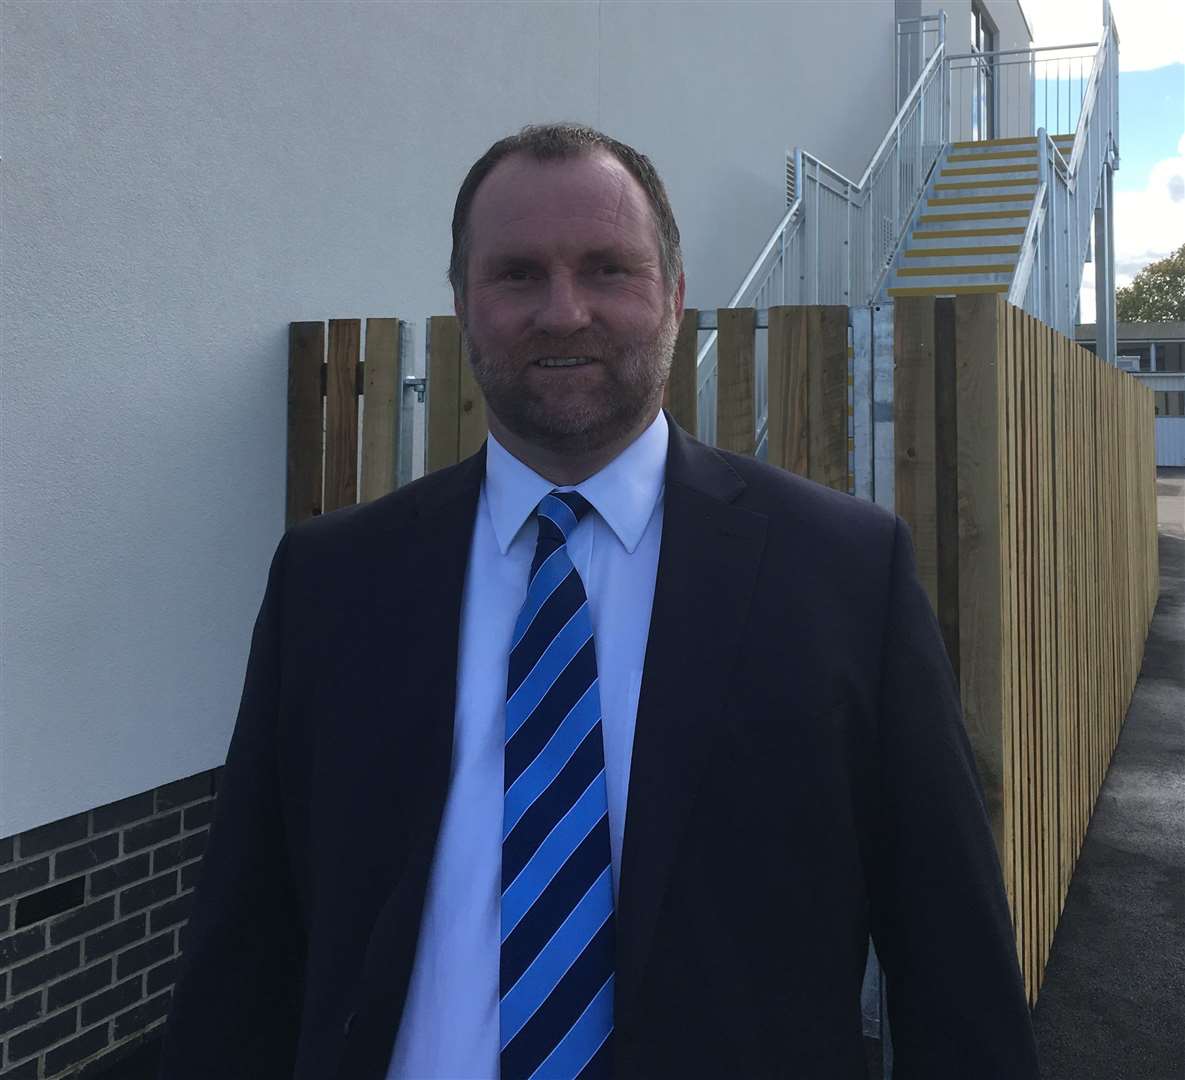 Wentworth Primary School headteacher Paul Langridge said the isolation periods would end during half-term in time for staff and pupils to be welcomed back at the start of the next.